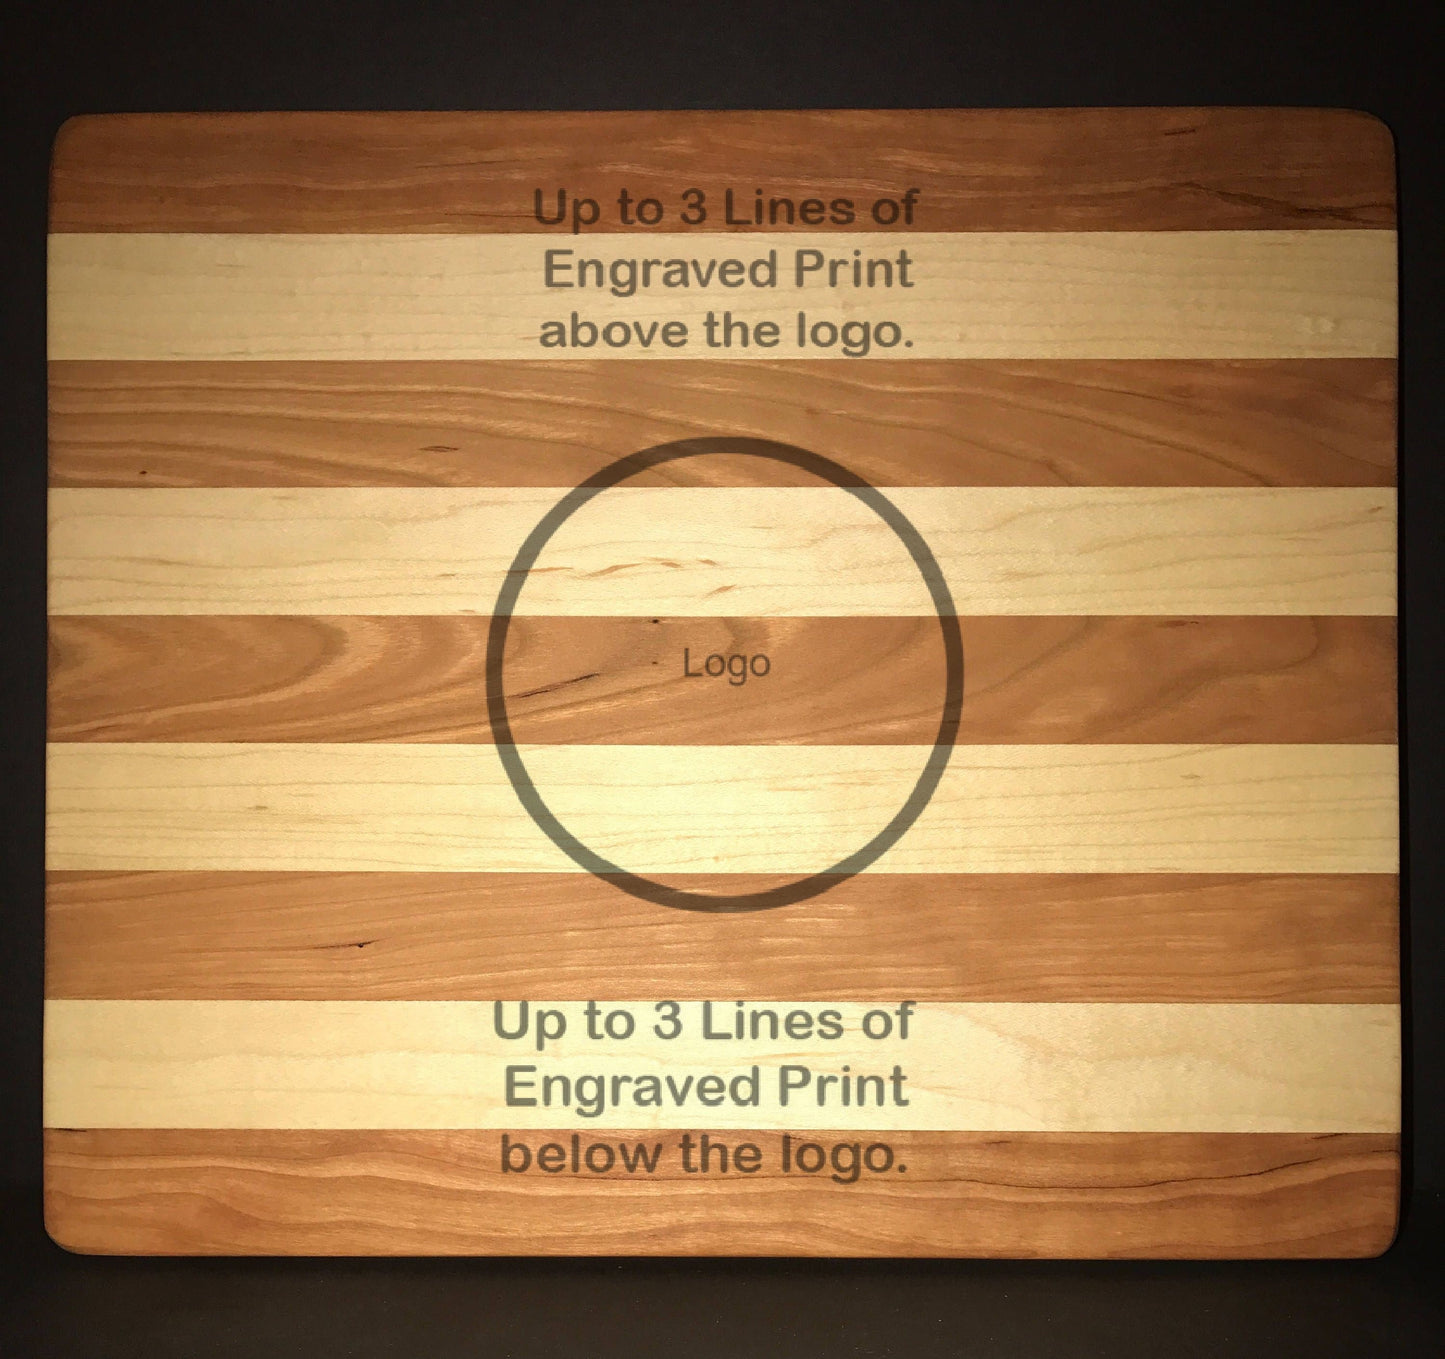 IAFF Jumbo Officially Licensed 24 X 36 X 2.5 Cutting Board Made Out Of Cherry and Maple